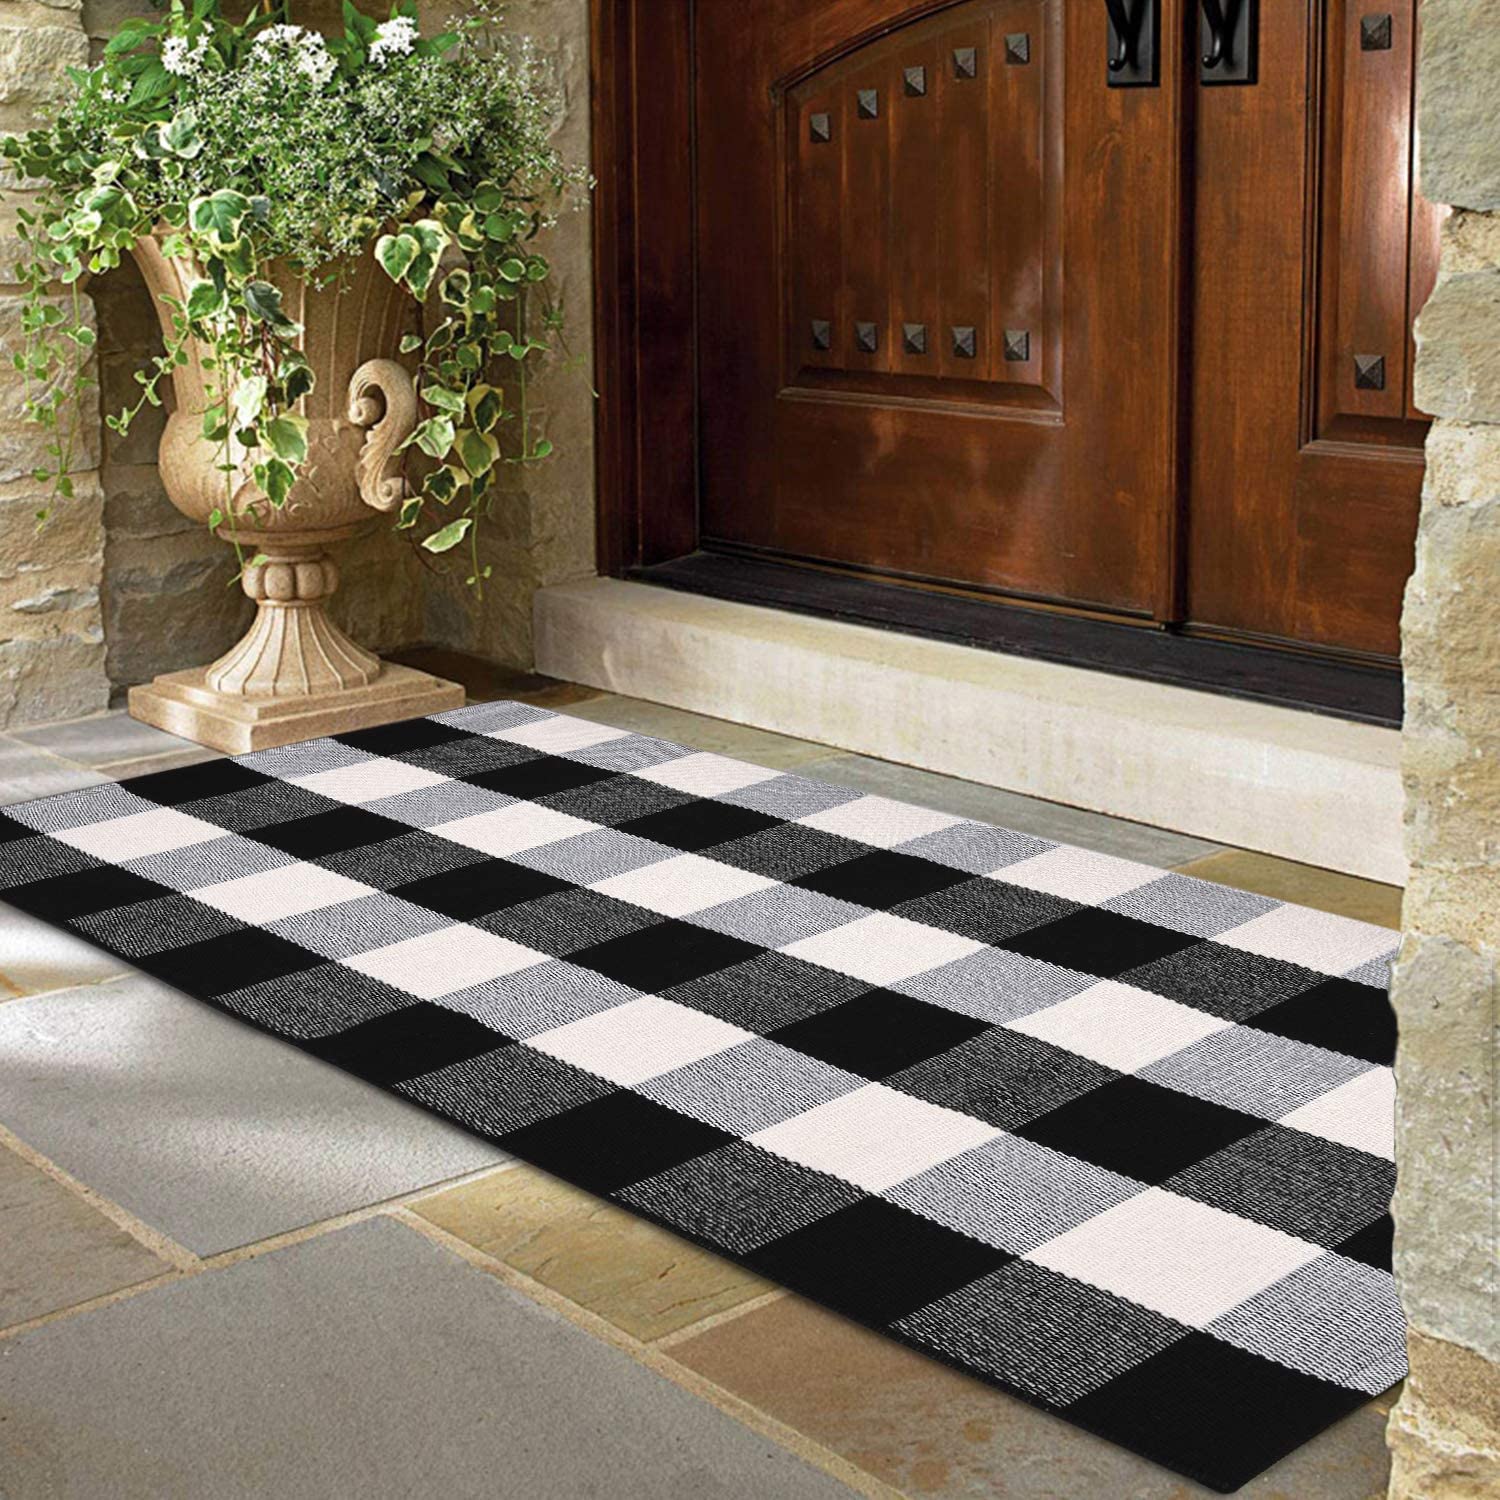 Upgraded Anti-Slip Mat 24x36 Black and White Buffalo Plaid Rug Front Porch